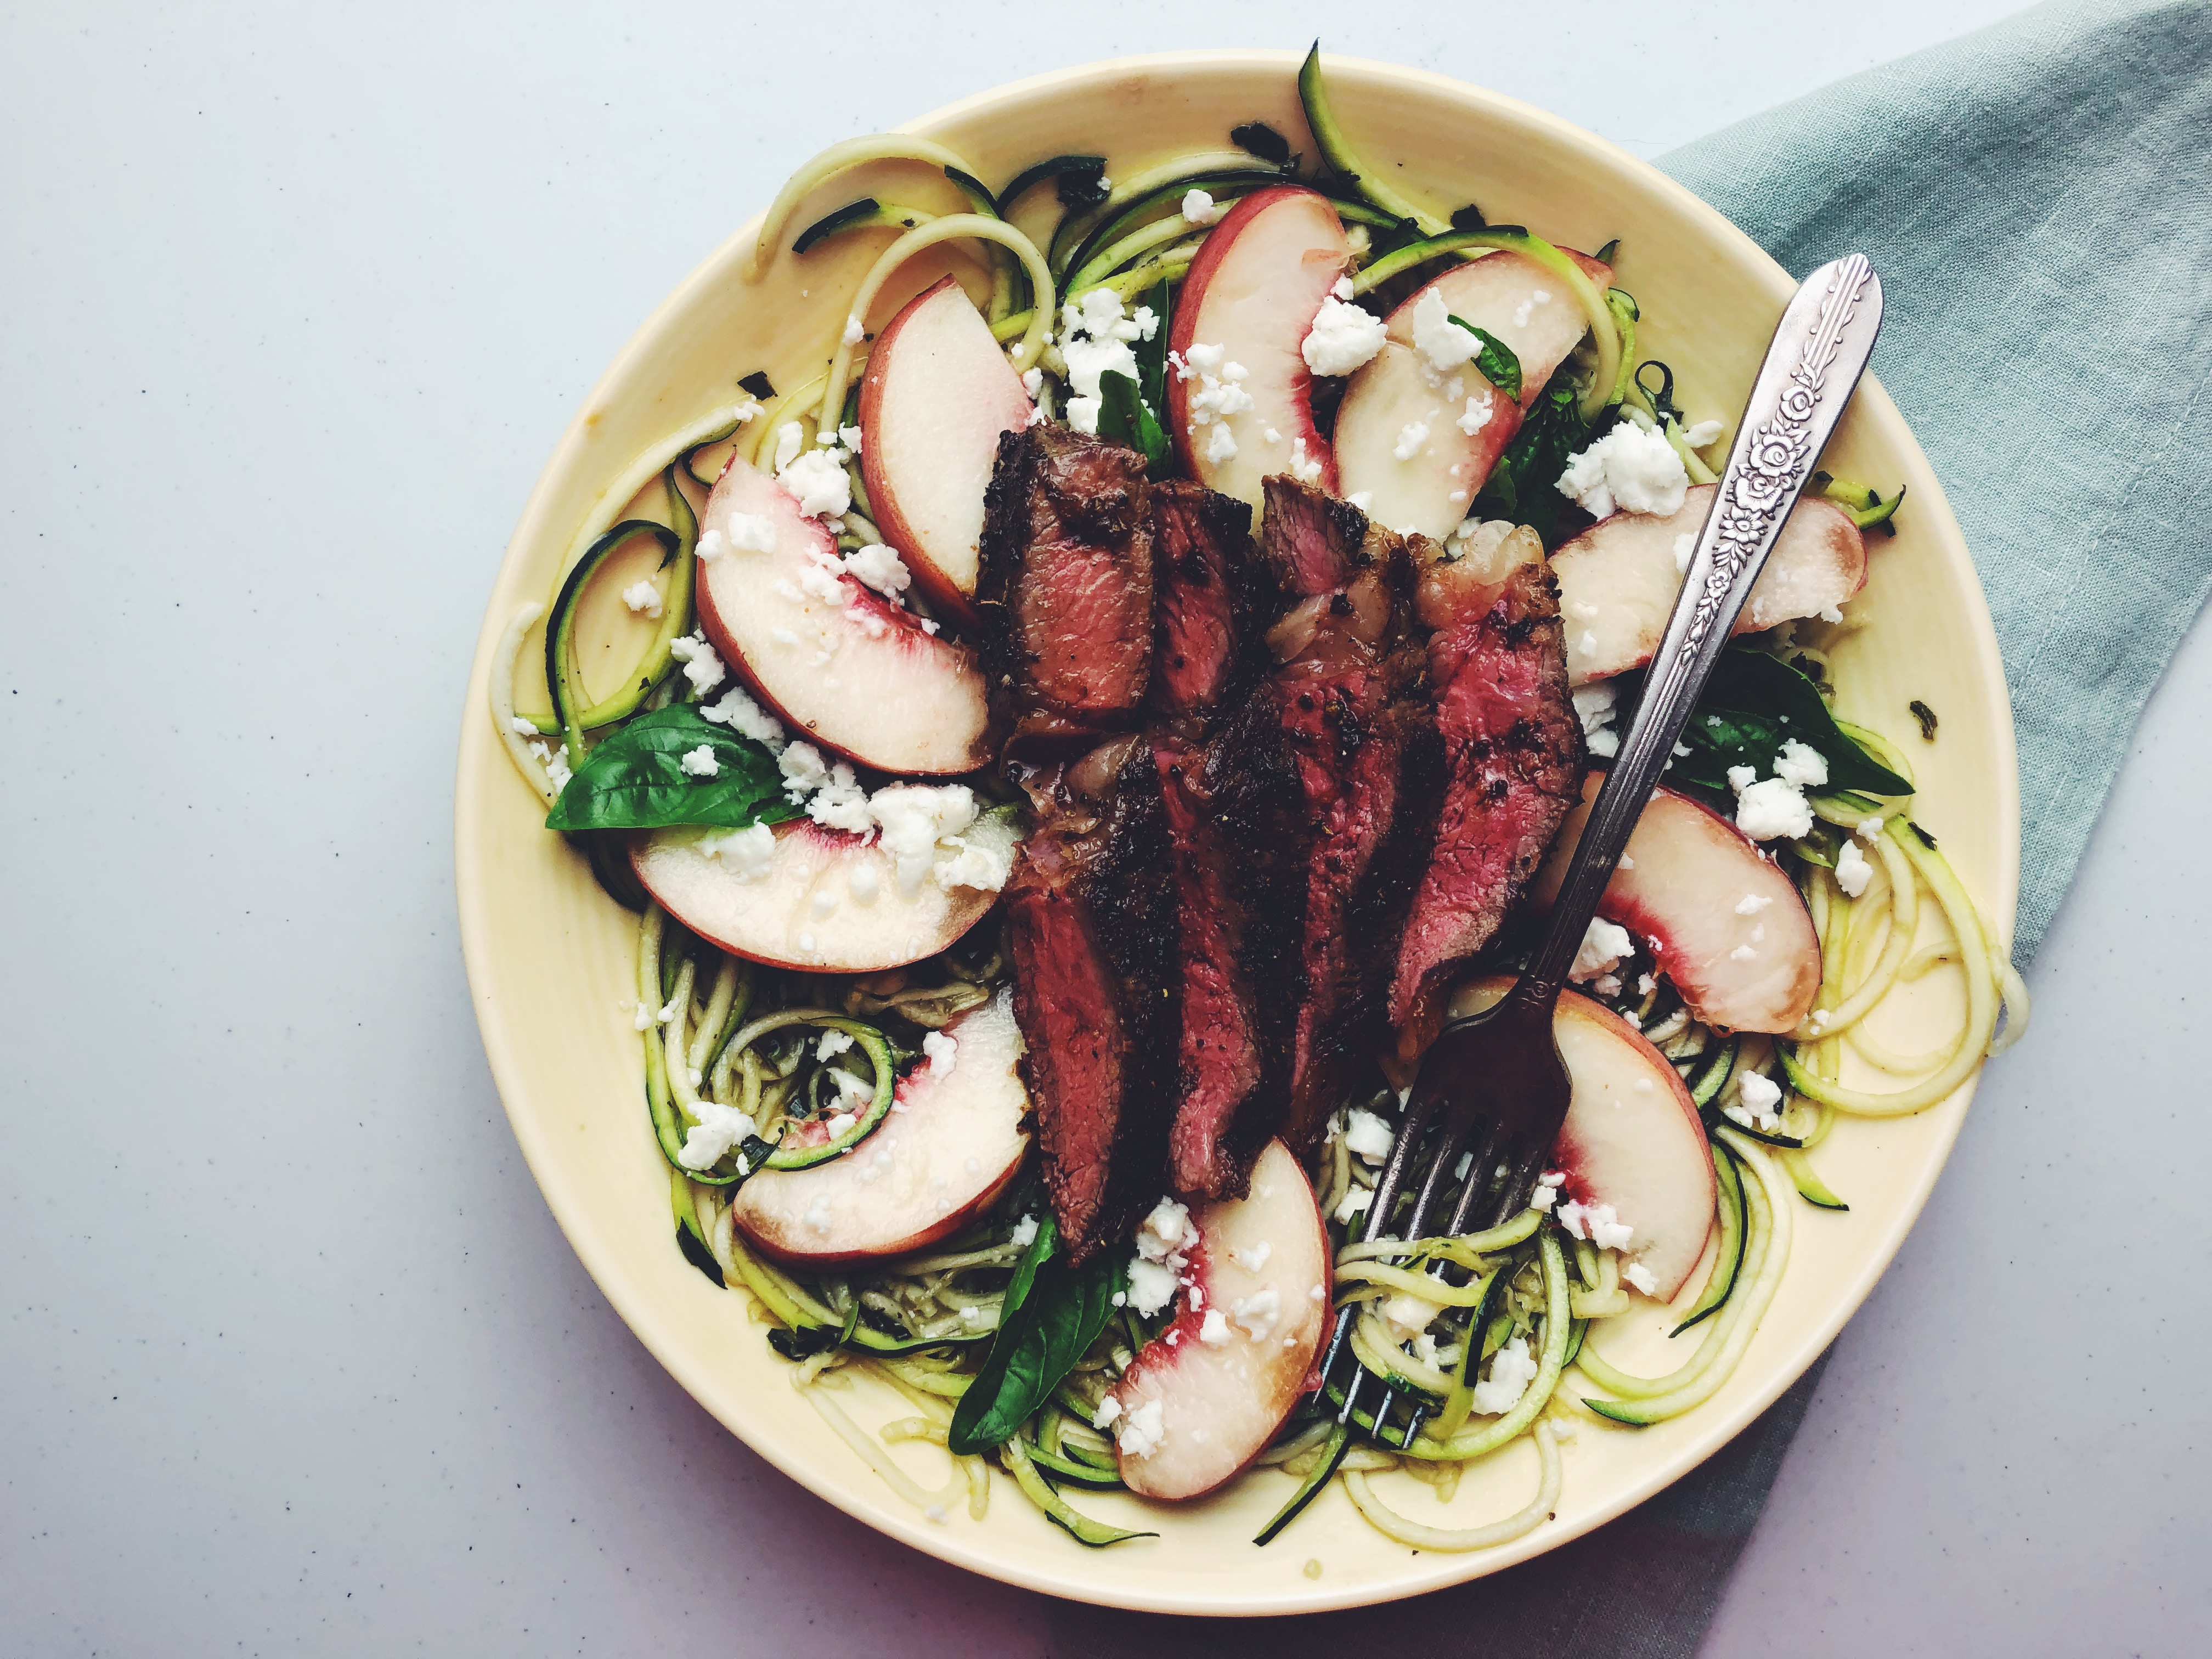 Zucchini Noodle Salad topped with white peaches and sirloin steak.